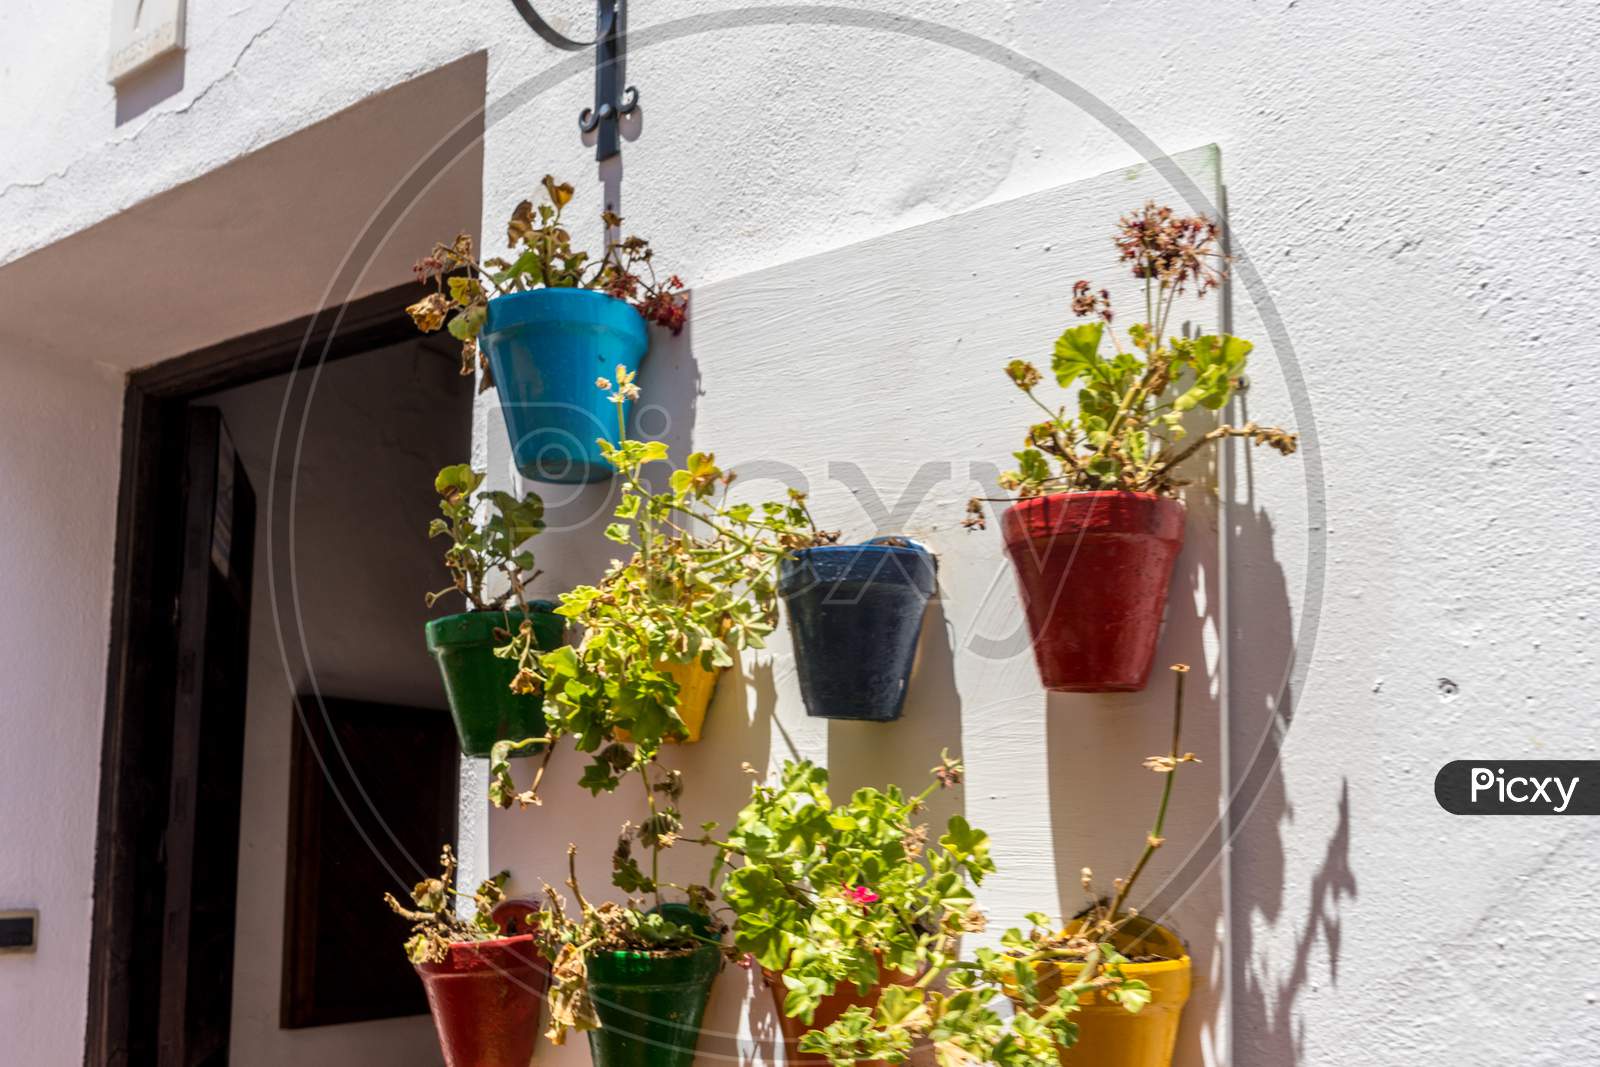 Spain, Cordoba, Potted Plants Hanging Against Wall